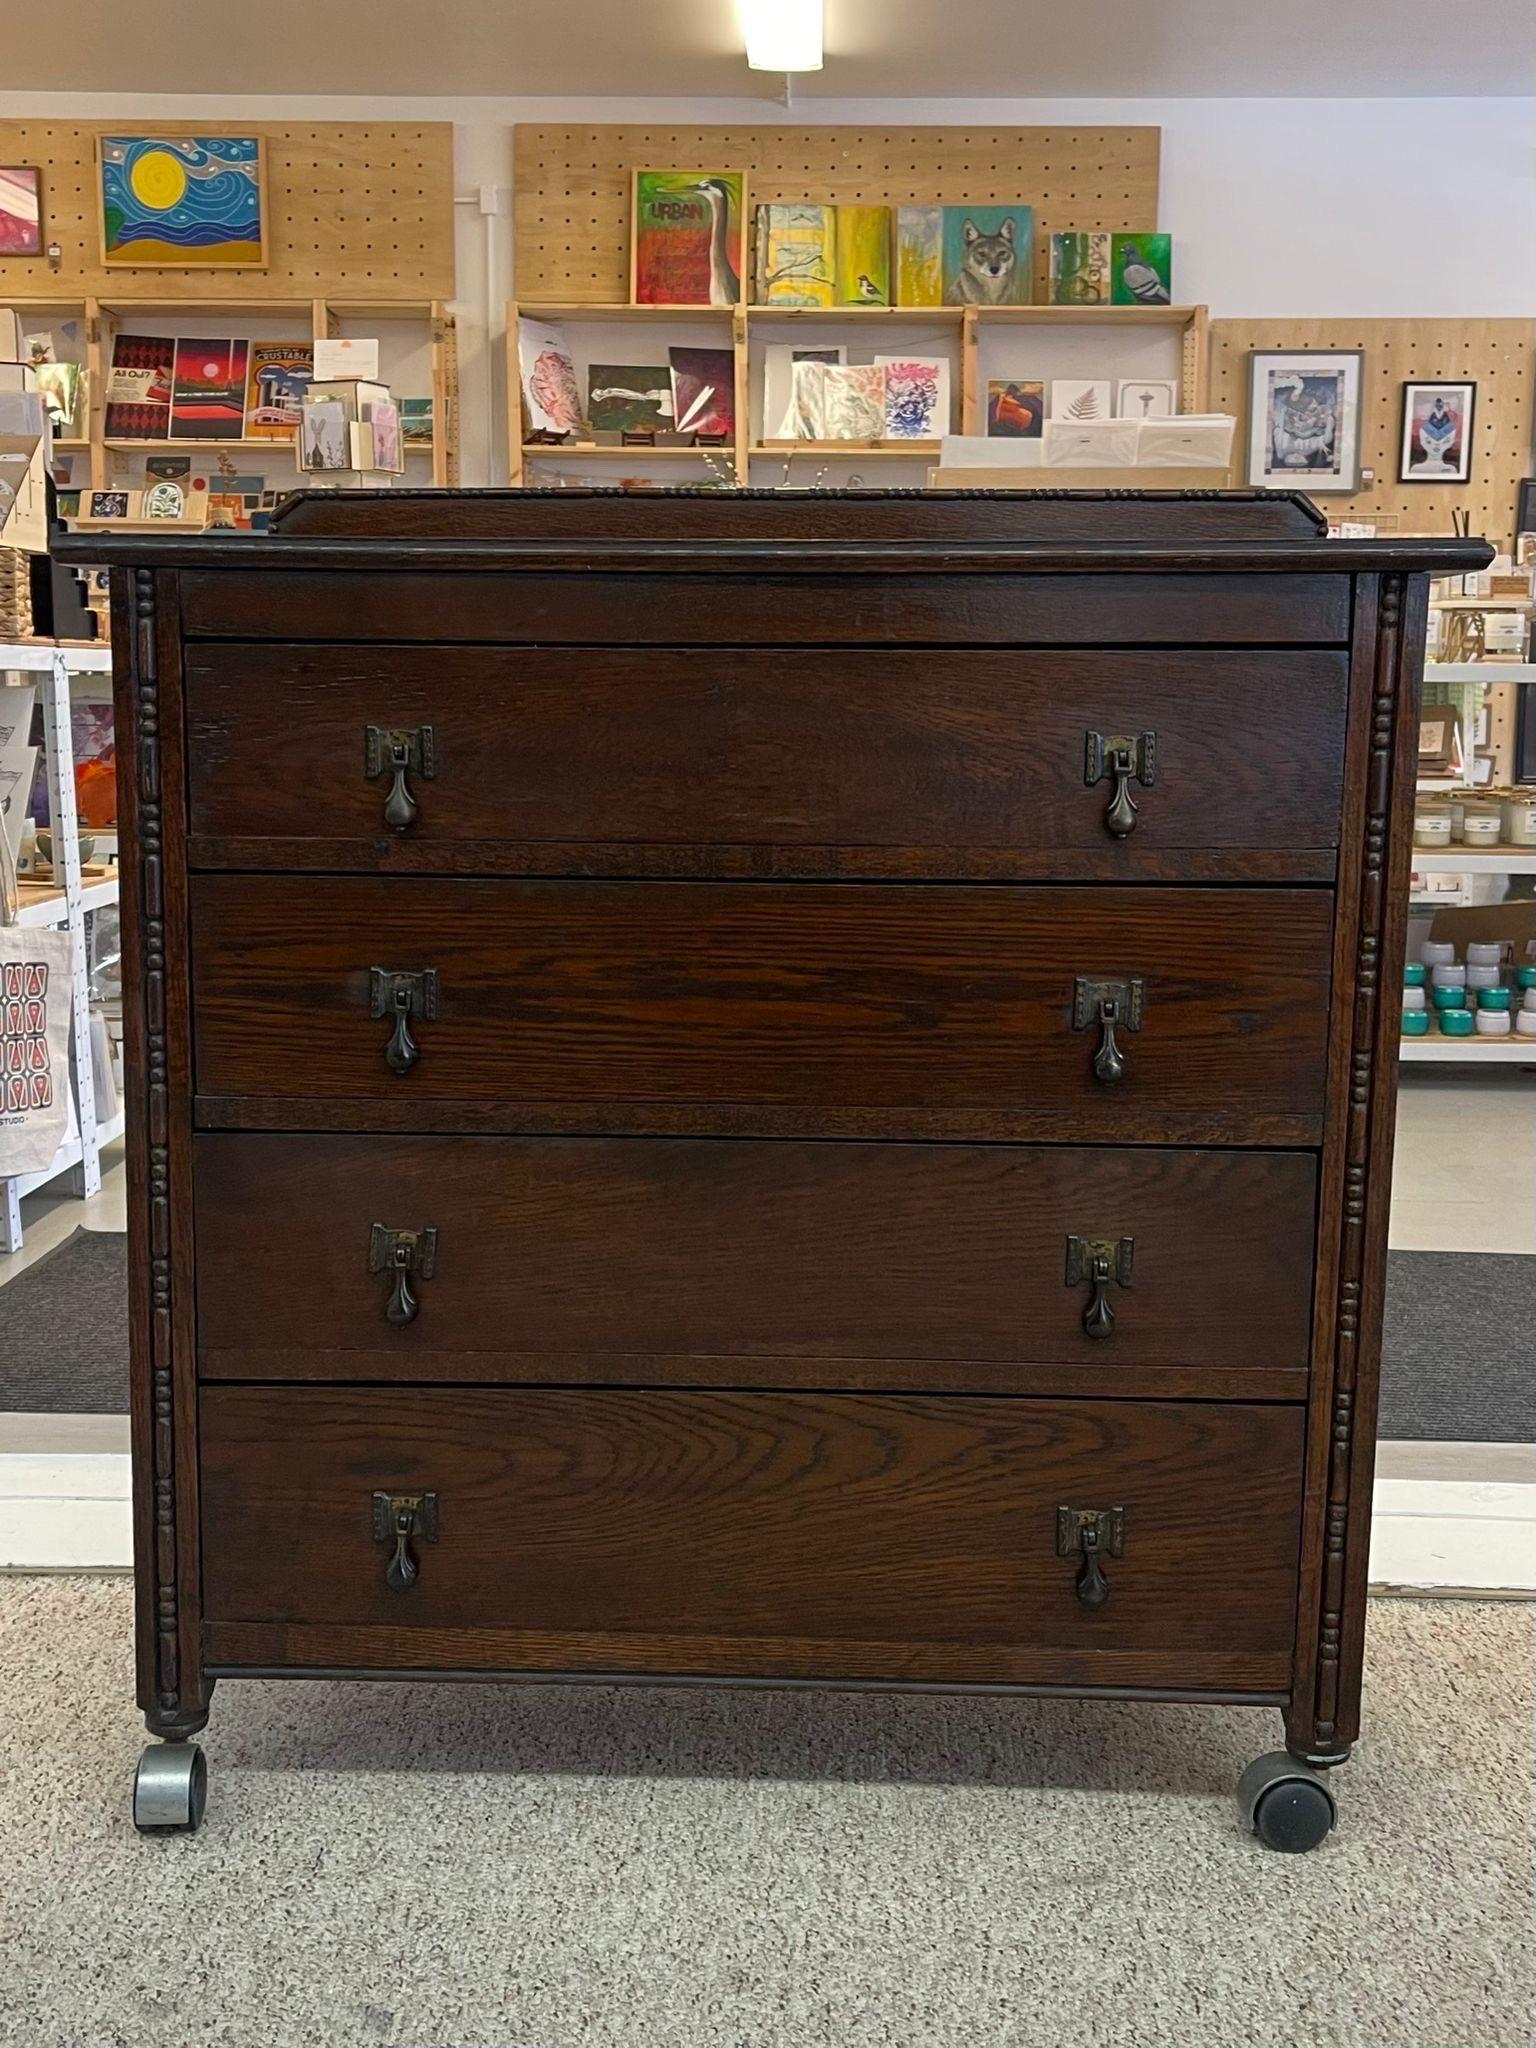 This Dresser Features four dovetailed drawers and original drop pull hardware. Finished back. Curved wood detailing on the front and top of dresser. Vintage Condition Consistent with Age as Pictured.

Dimensions. 36 W ; 18 D ; 38 H